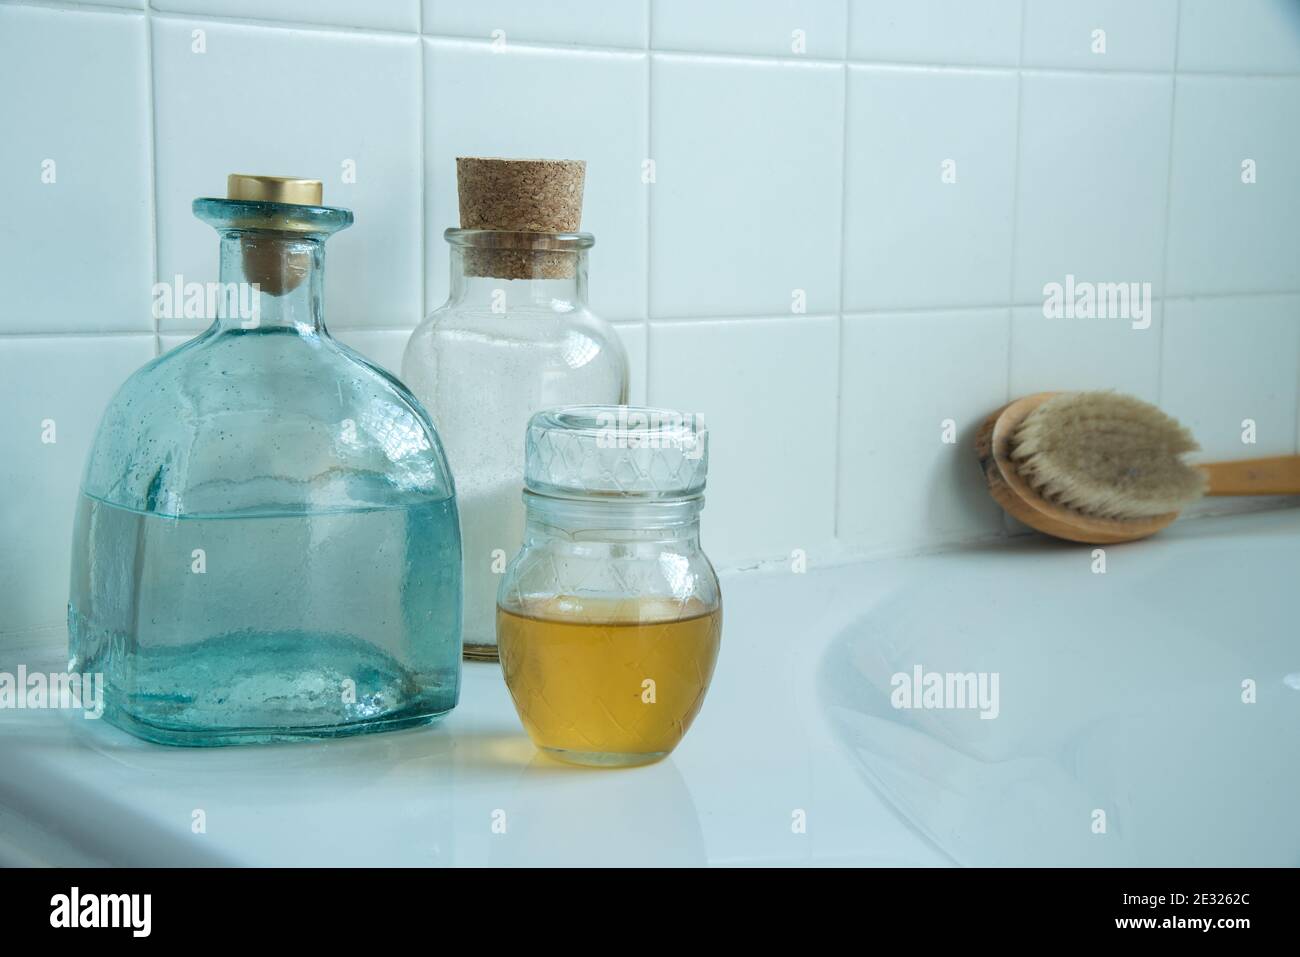 Bubble bath and bath salts. Bottles and brush on a bathtub with soft light from a window. Stock Photo